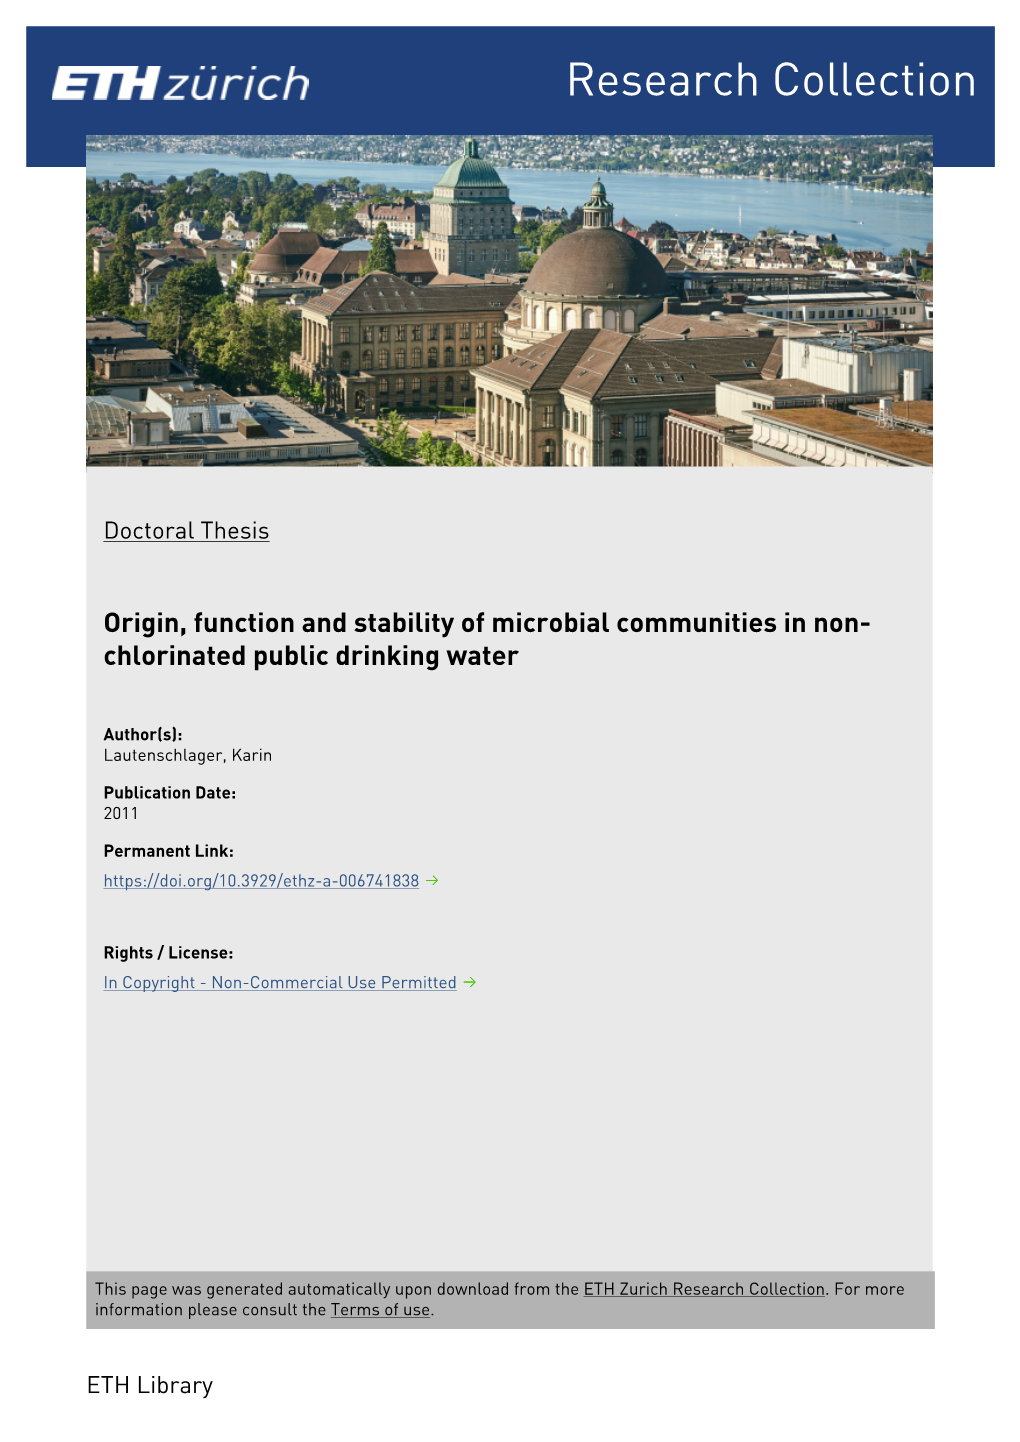 Origin, Function and Stability of Microbial Communities in Non- Chlorinated Public Drinking Water